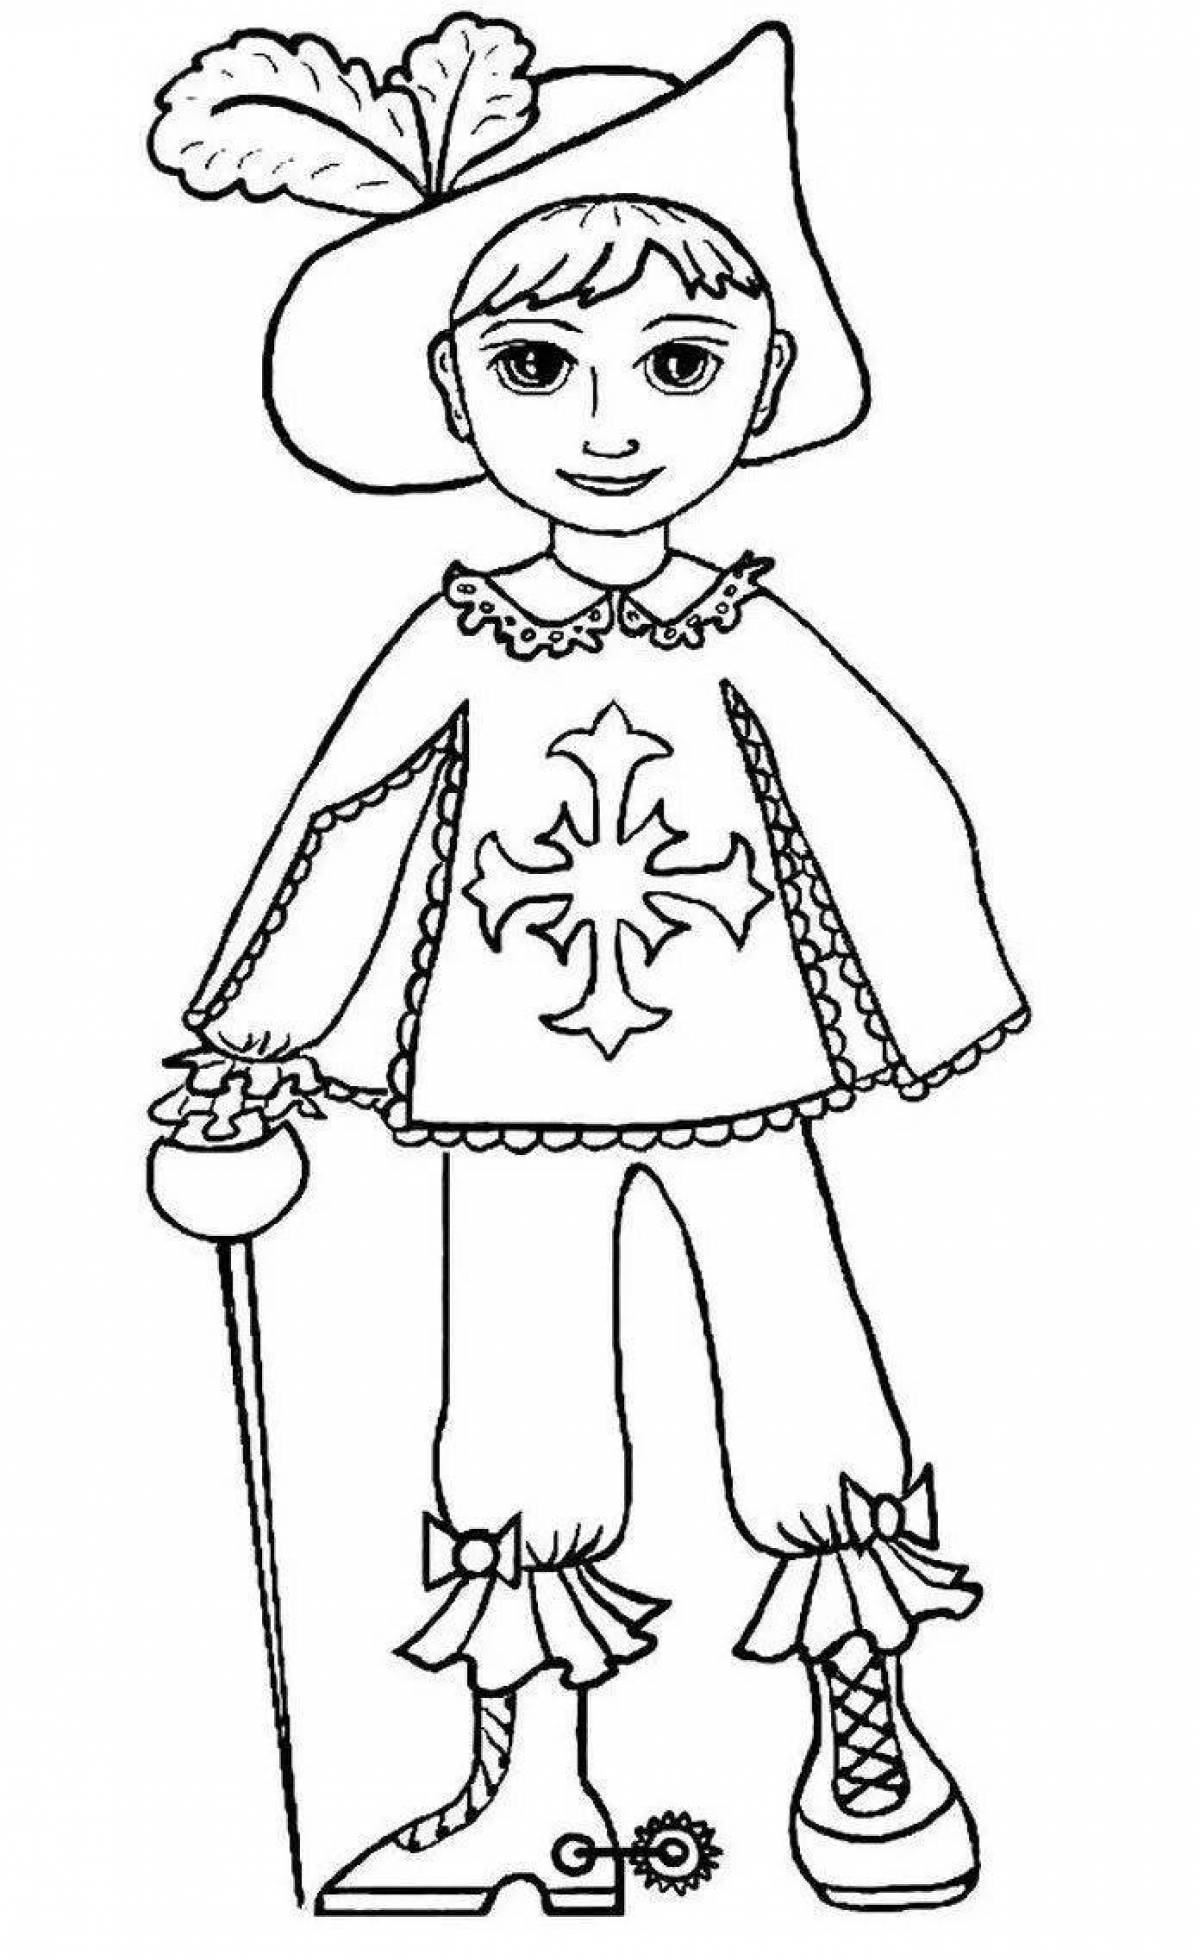 Coloring page charming carnival costume